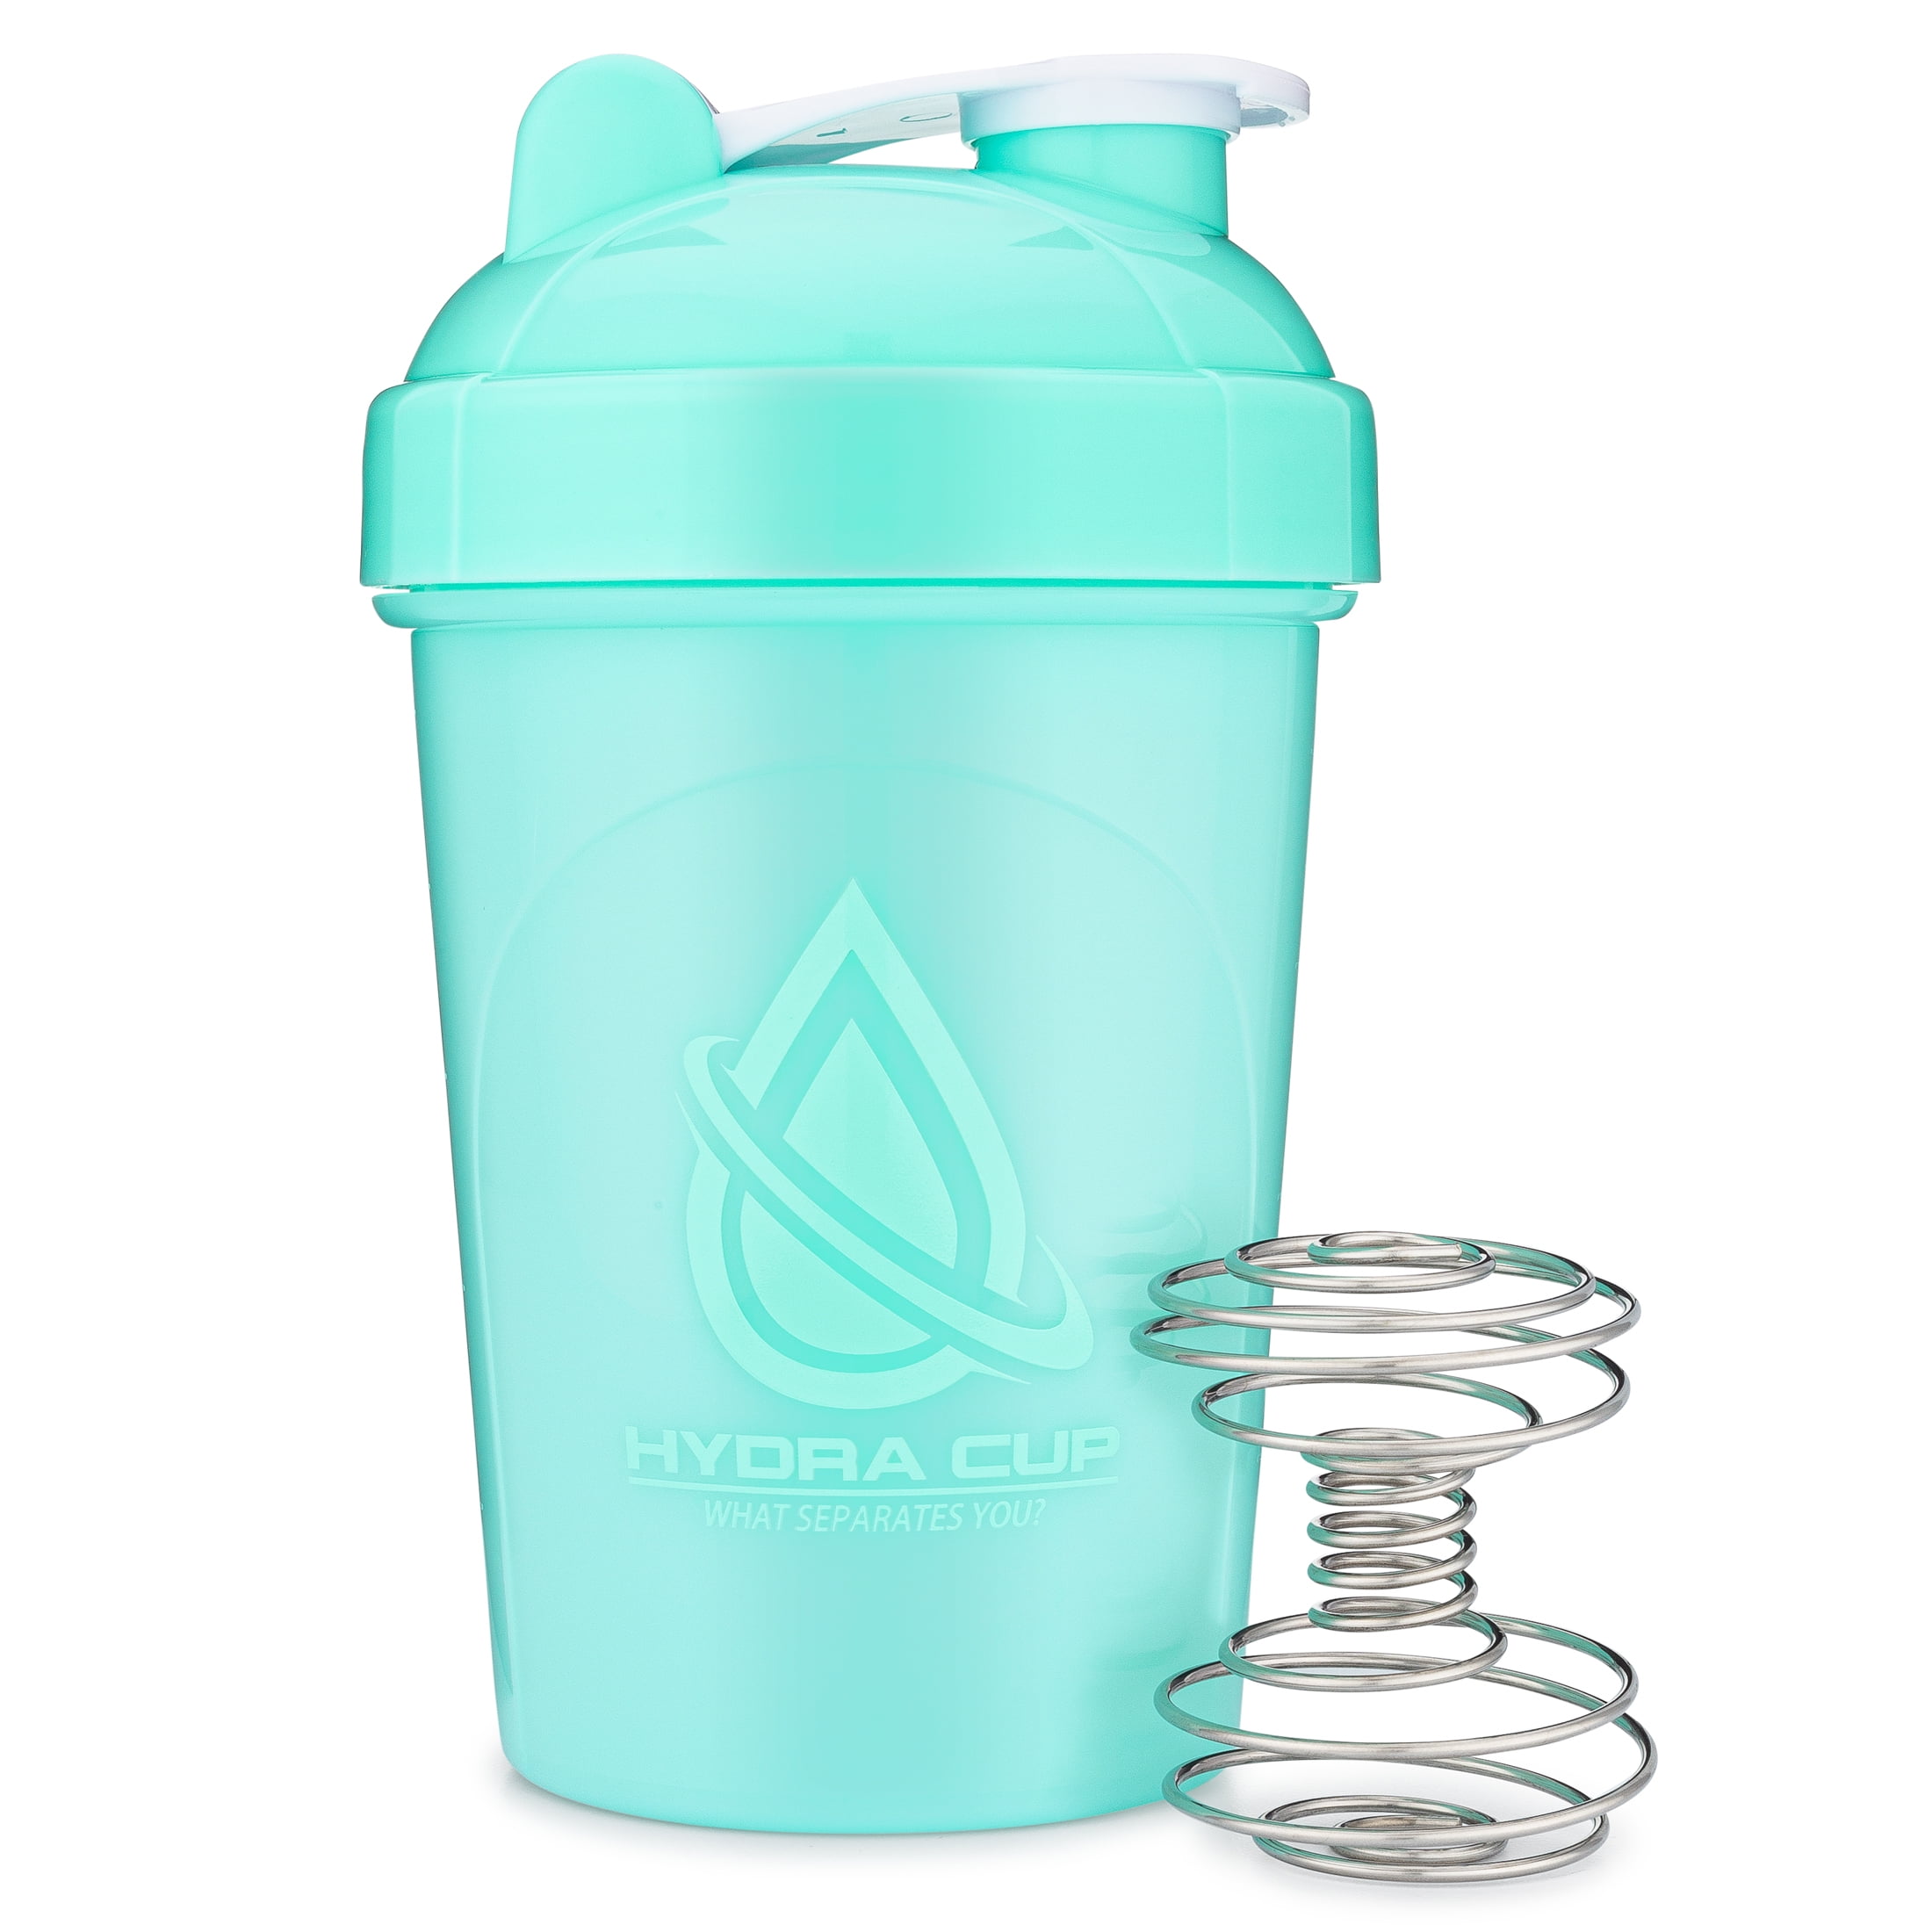 Hydra Cup - 4 Pack - 32oz Squeeze Water Bottles Bulk Set, BPA Free, for Sports, Cycling, Bike, Quick Squirt Hydration, Shaker Cup Wire Whisk